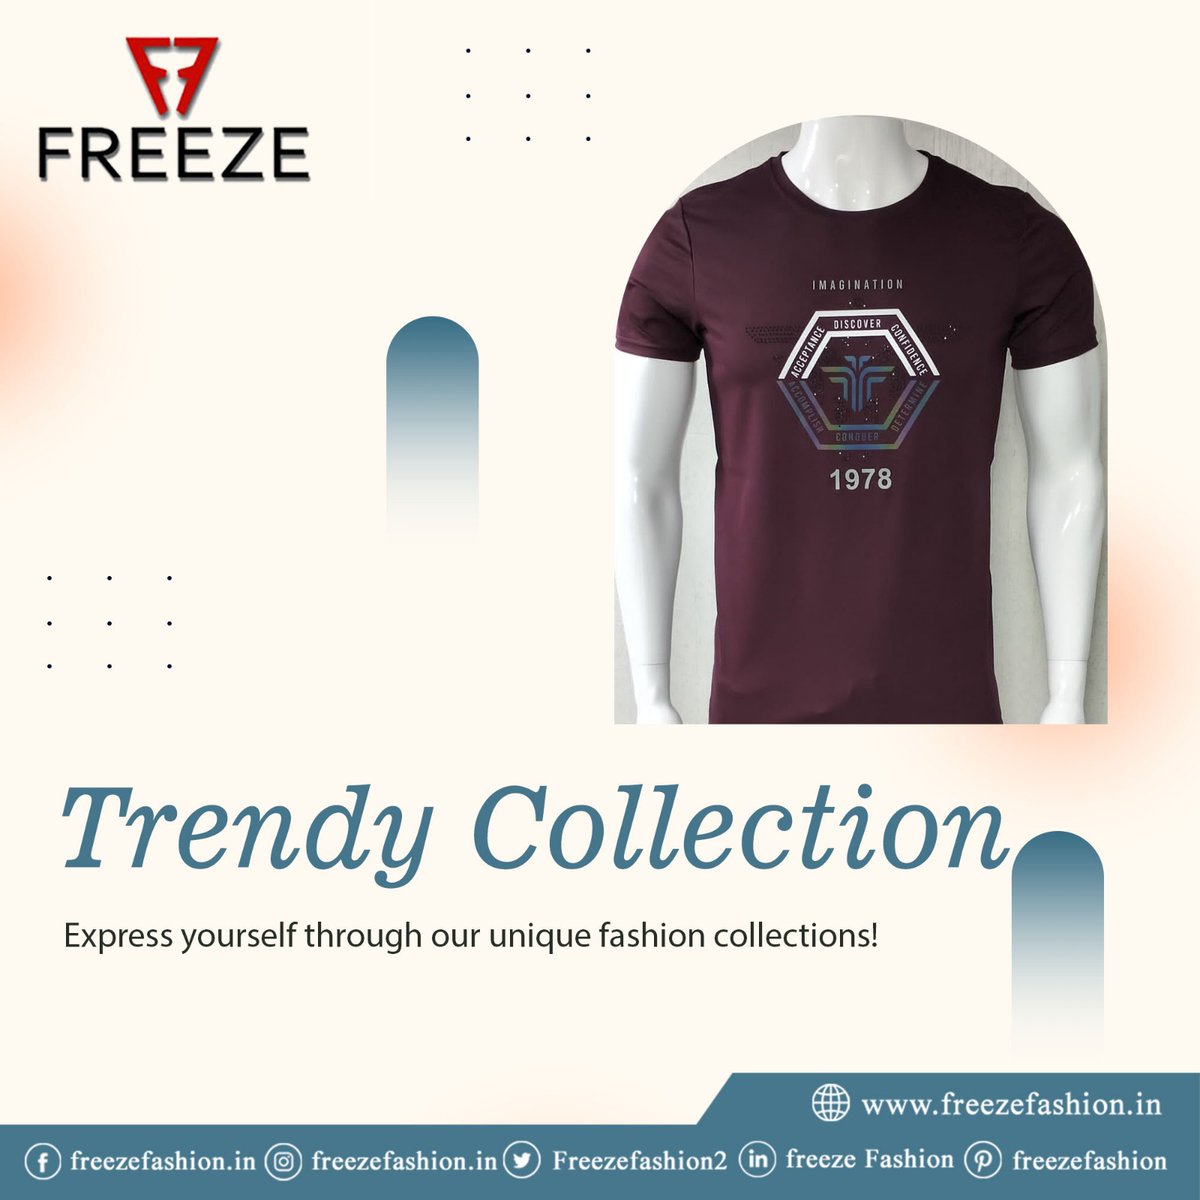 Express yourself through our unique fashion collection

freezefashion.in
#freezefashion #mensfashion #tshirt #mensstyle #contactnow #style #fashion #menswear #swag #express #trendy #unique